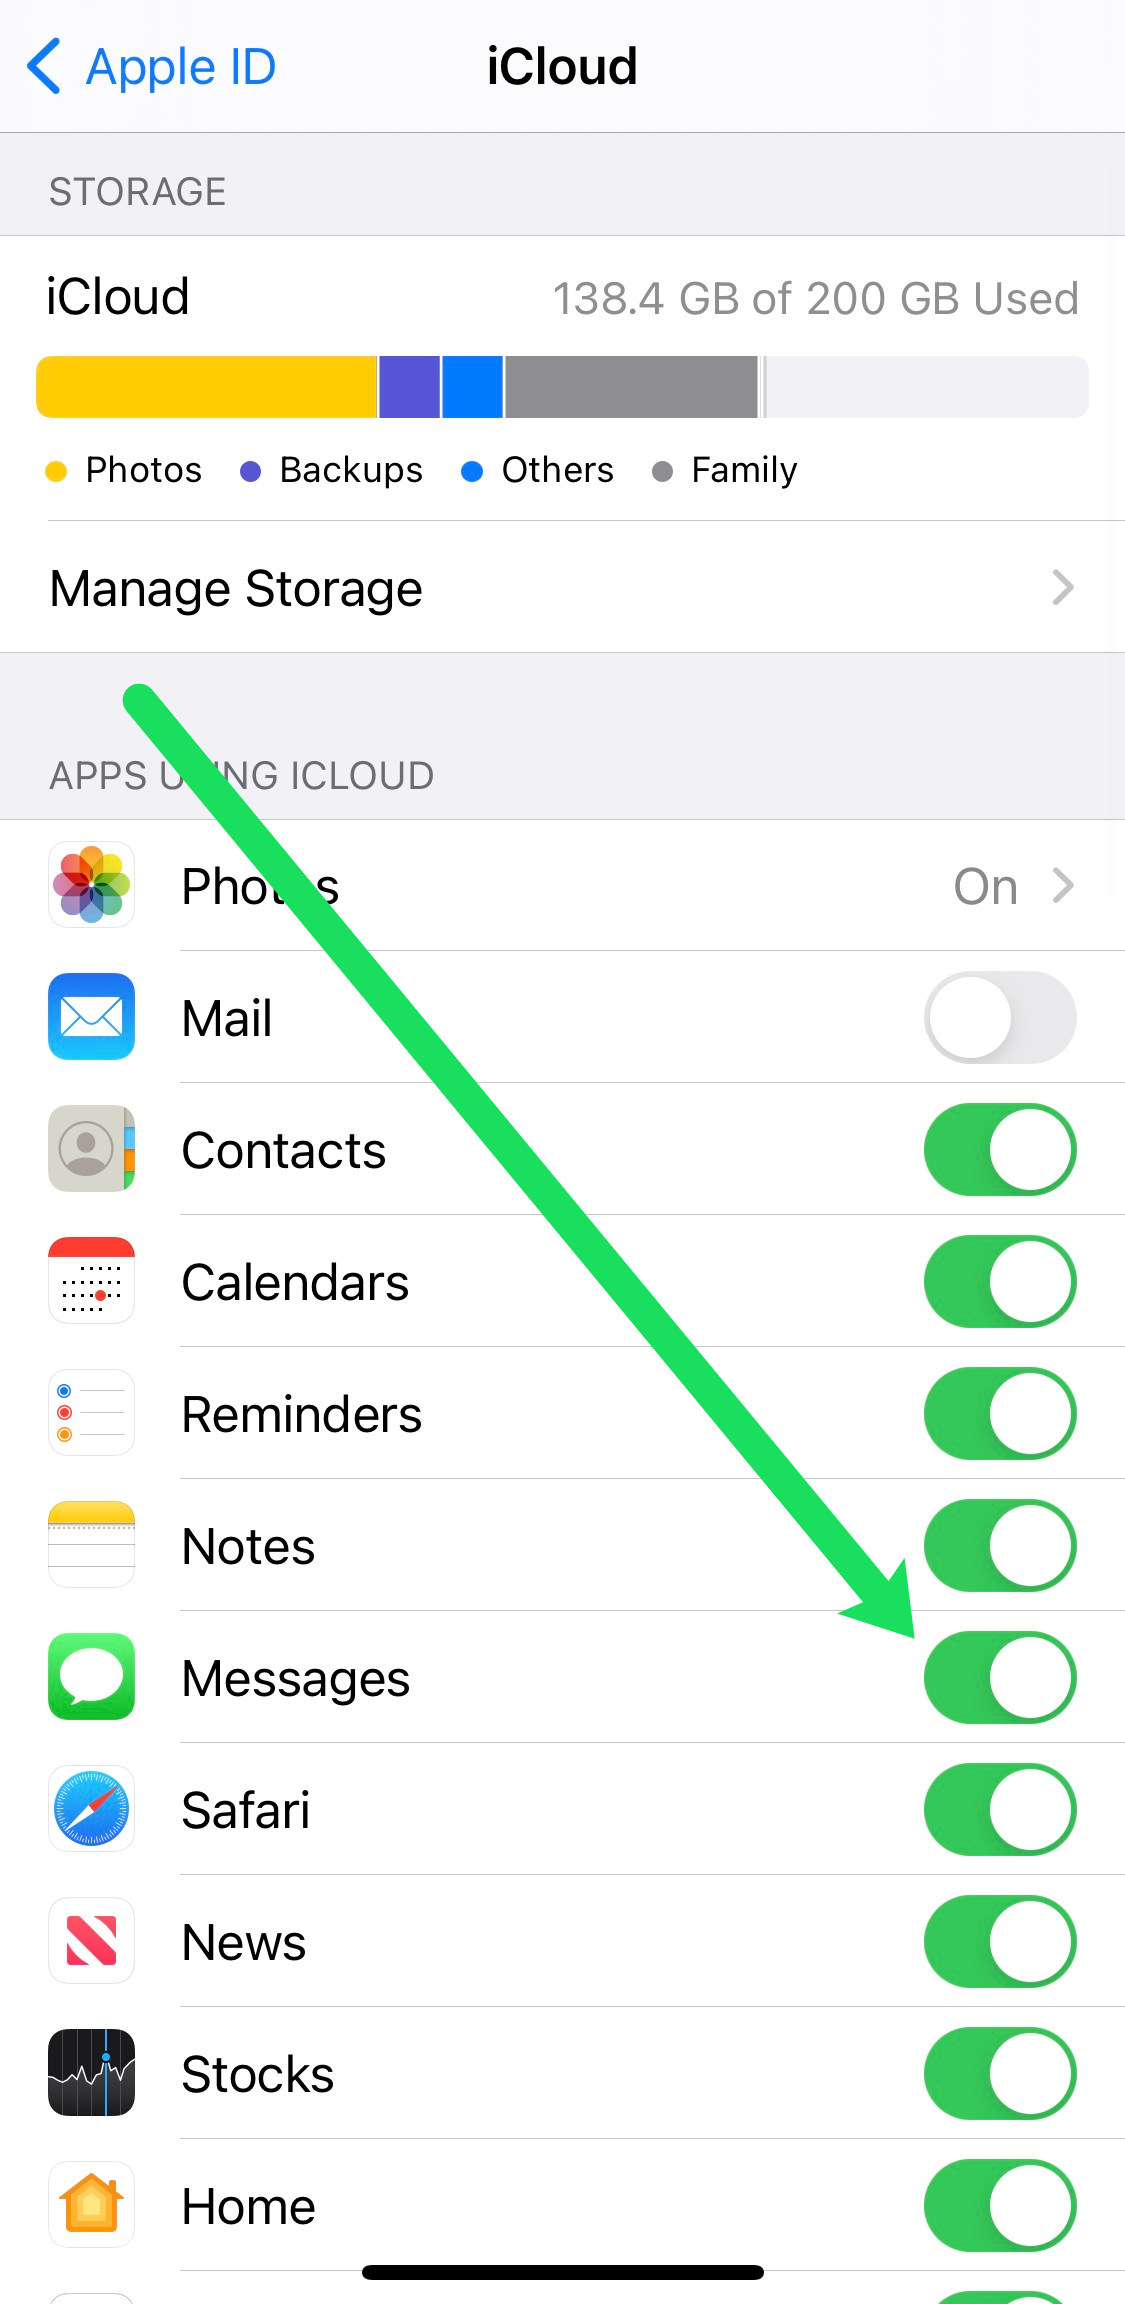 How to check deleted texts on iphone